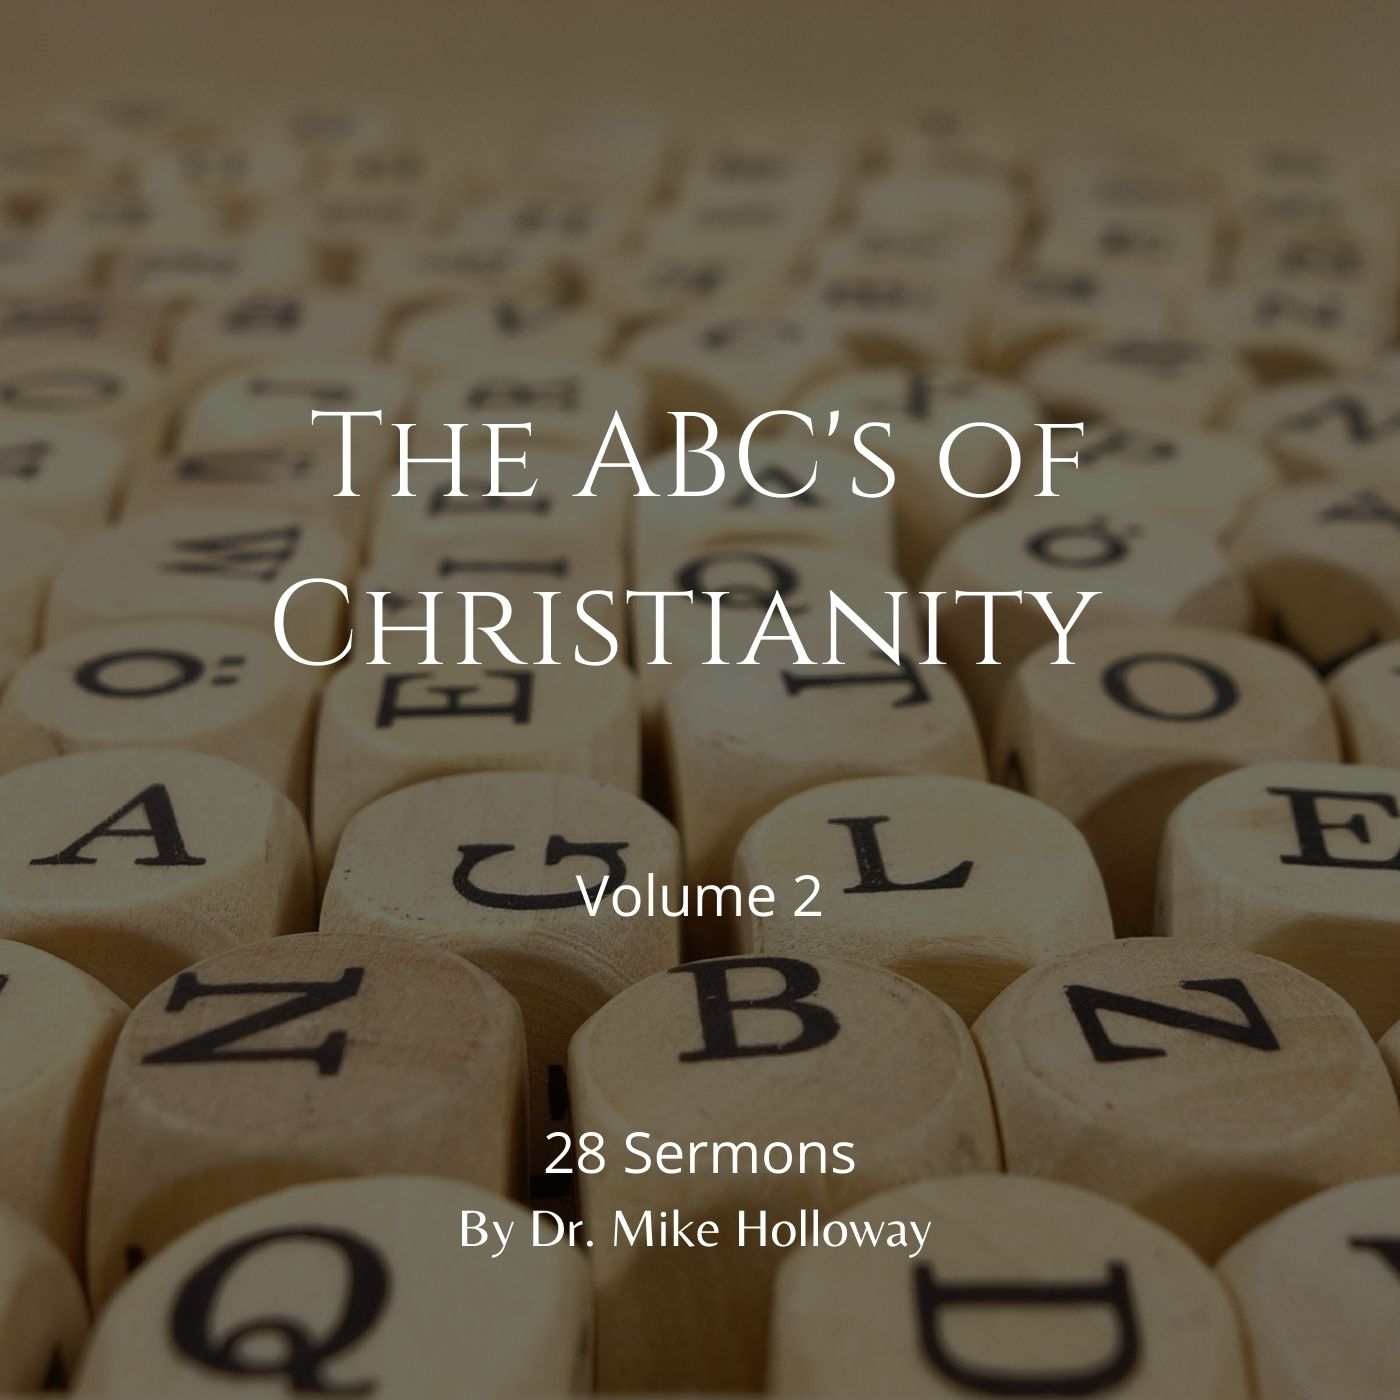 The ABC’s of Christianity – Volume 2